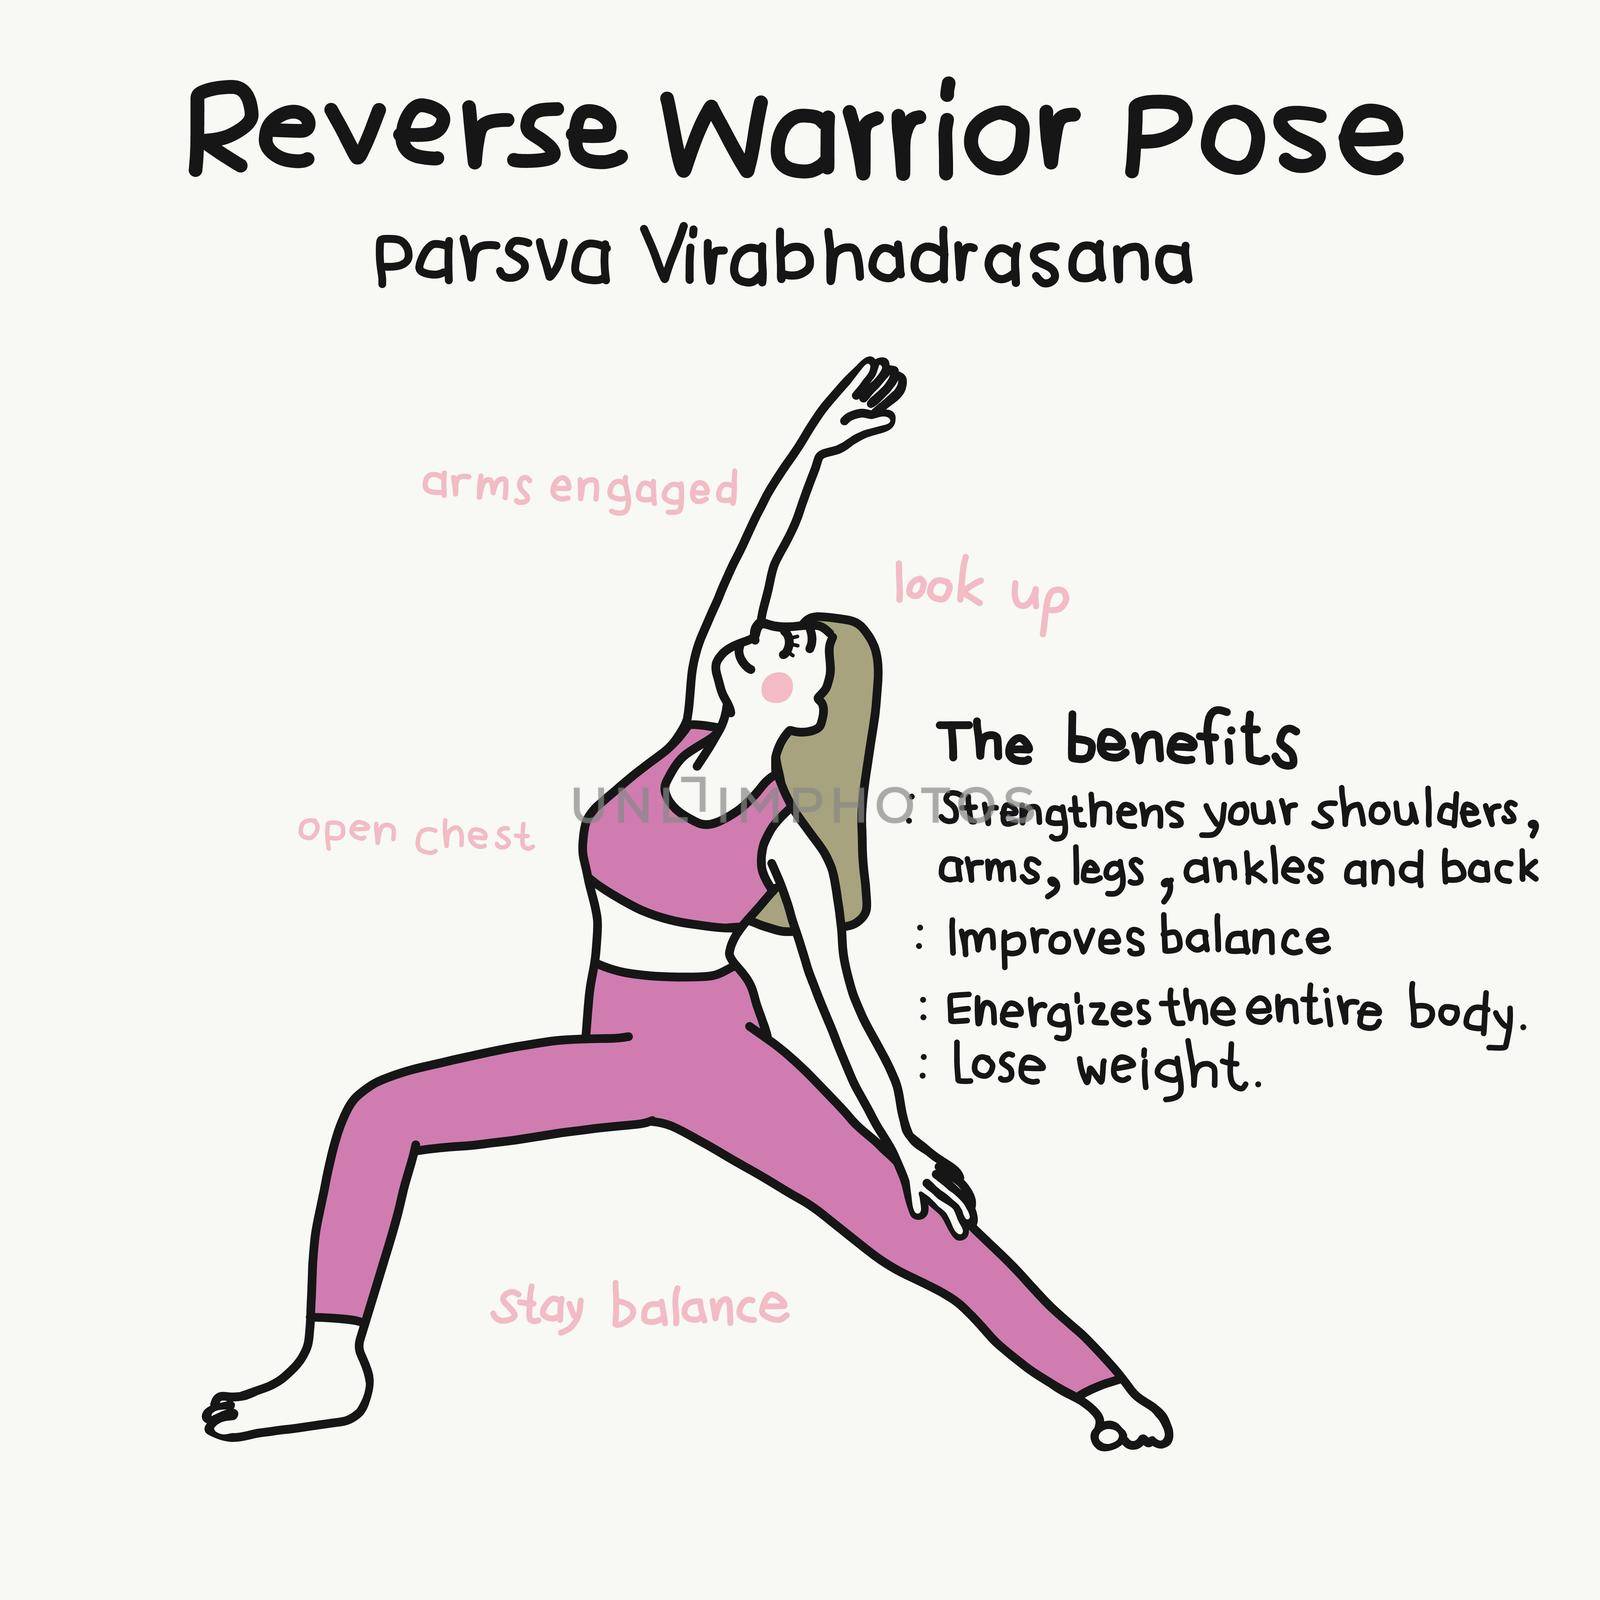 Reverse warrior yoga pose and benefits cartoon vector illustration by Yoopho